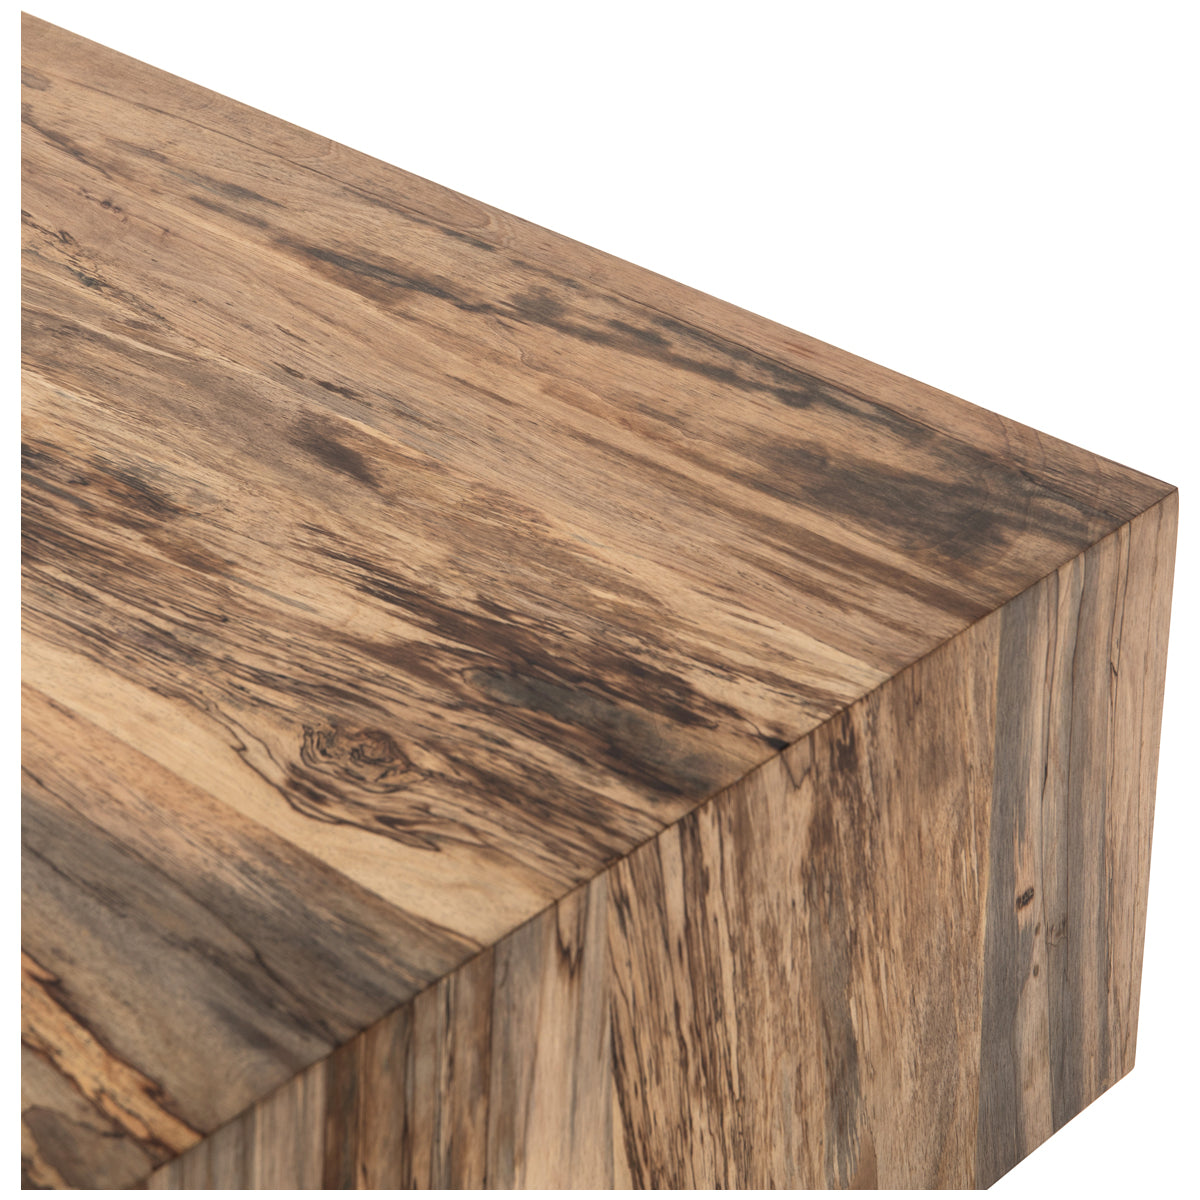 Four Hands Wesson Hudson Square Coffee Table - Spalted Primavera